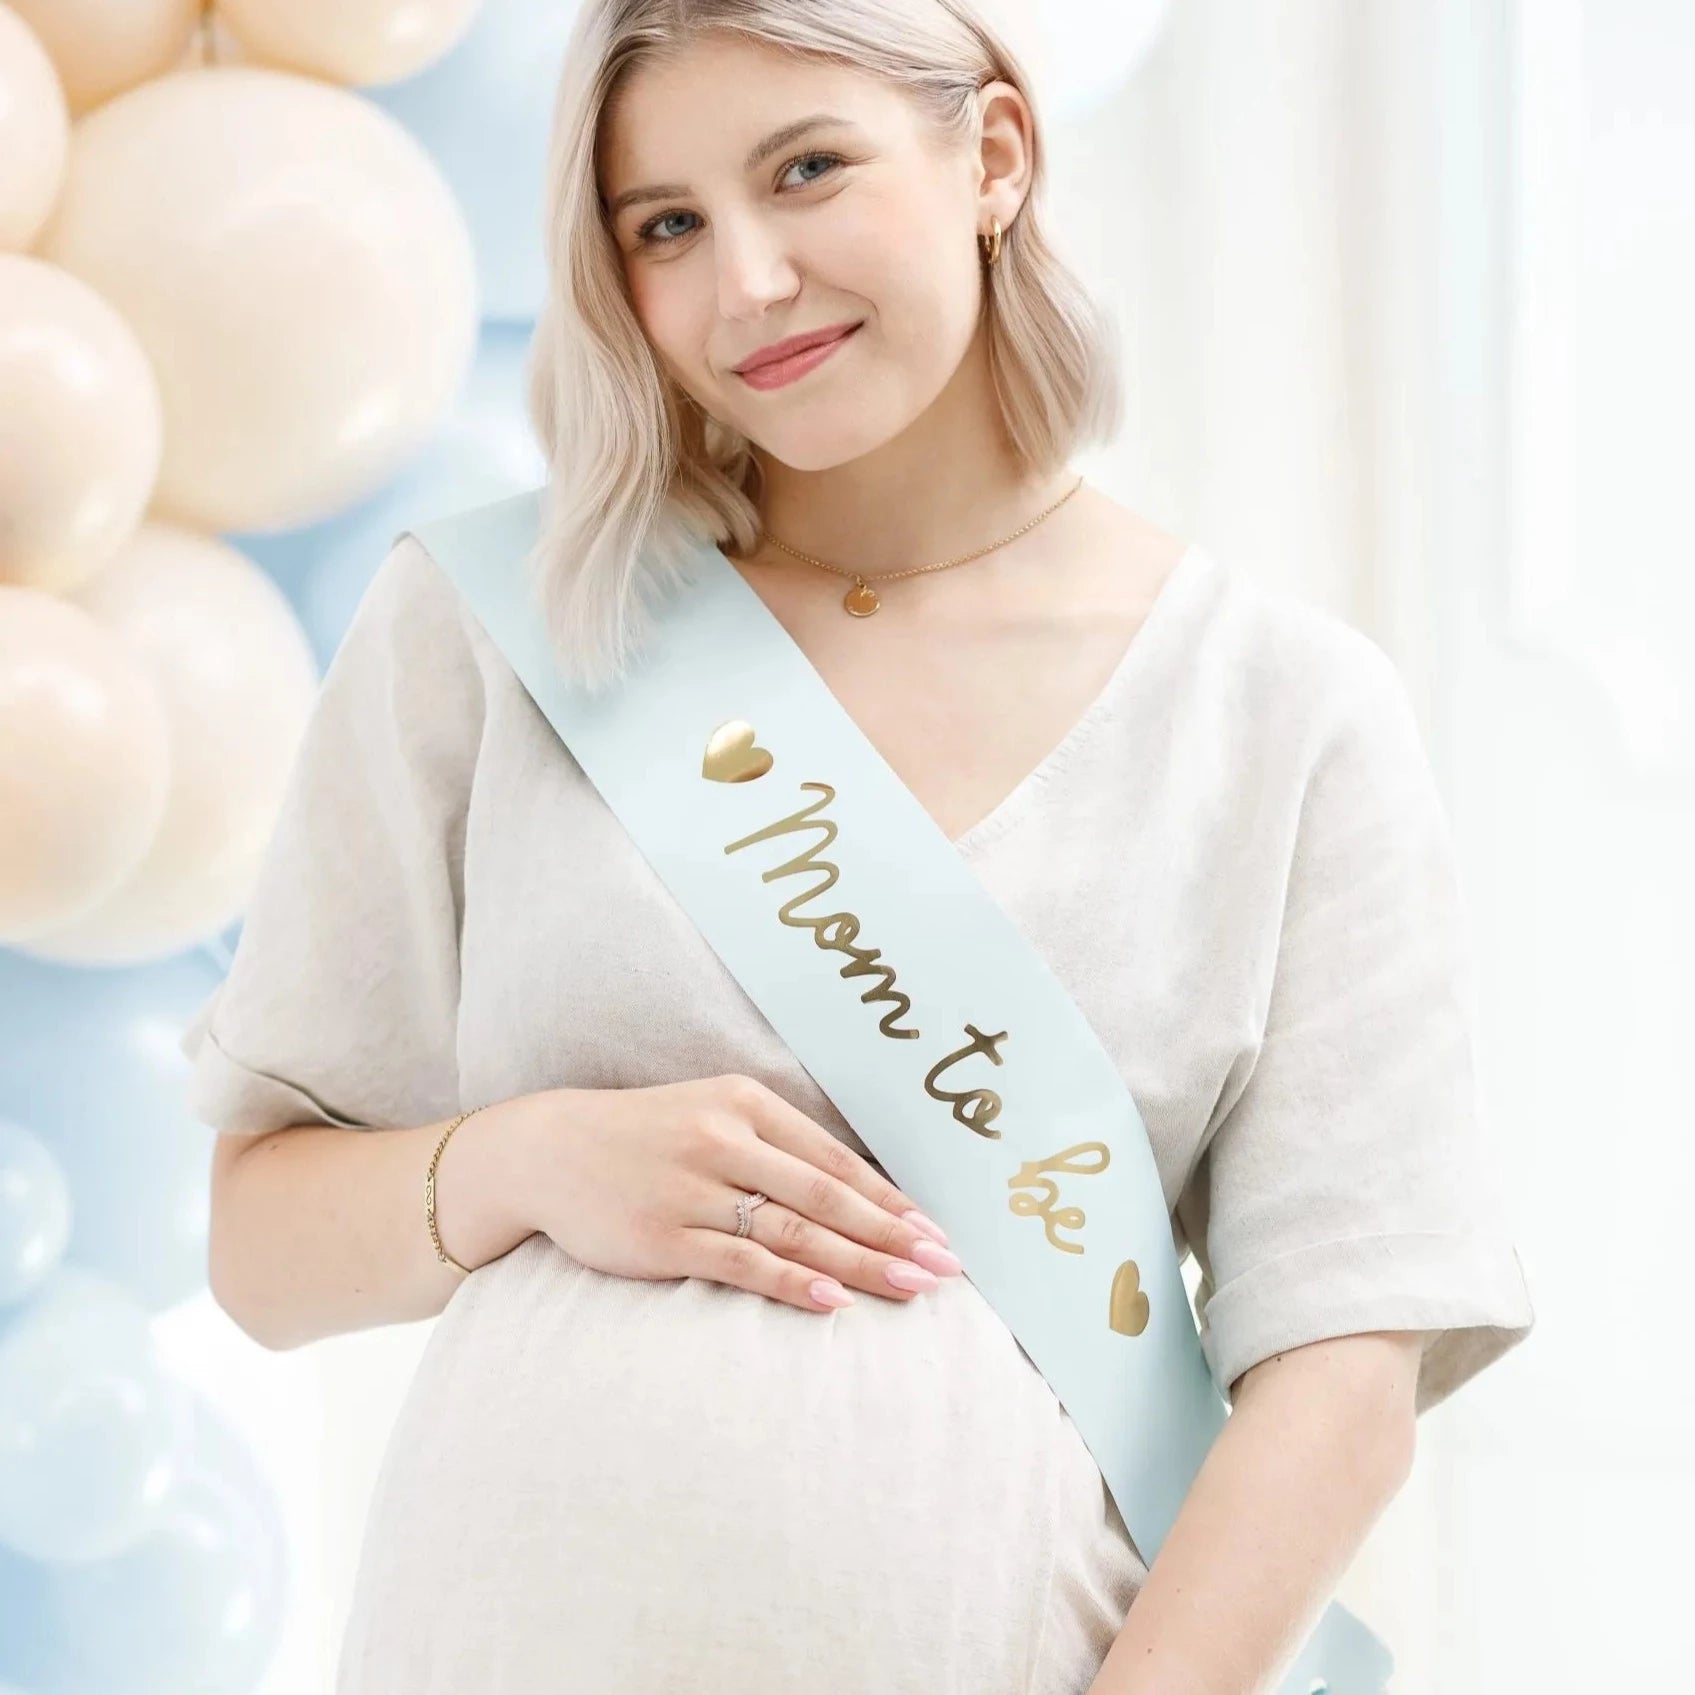 PartyDeco: Blue Sash for the Future Mother Mom To Be